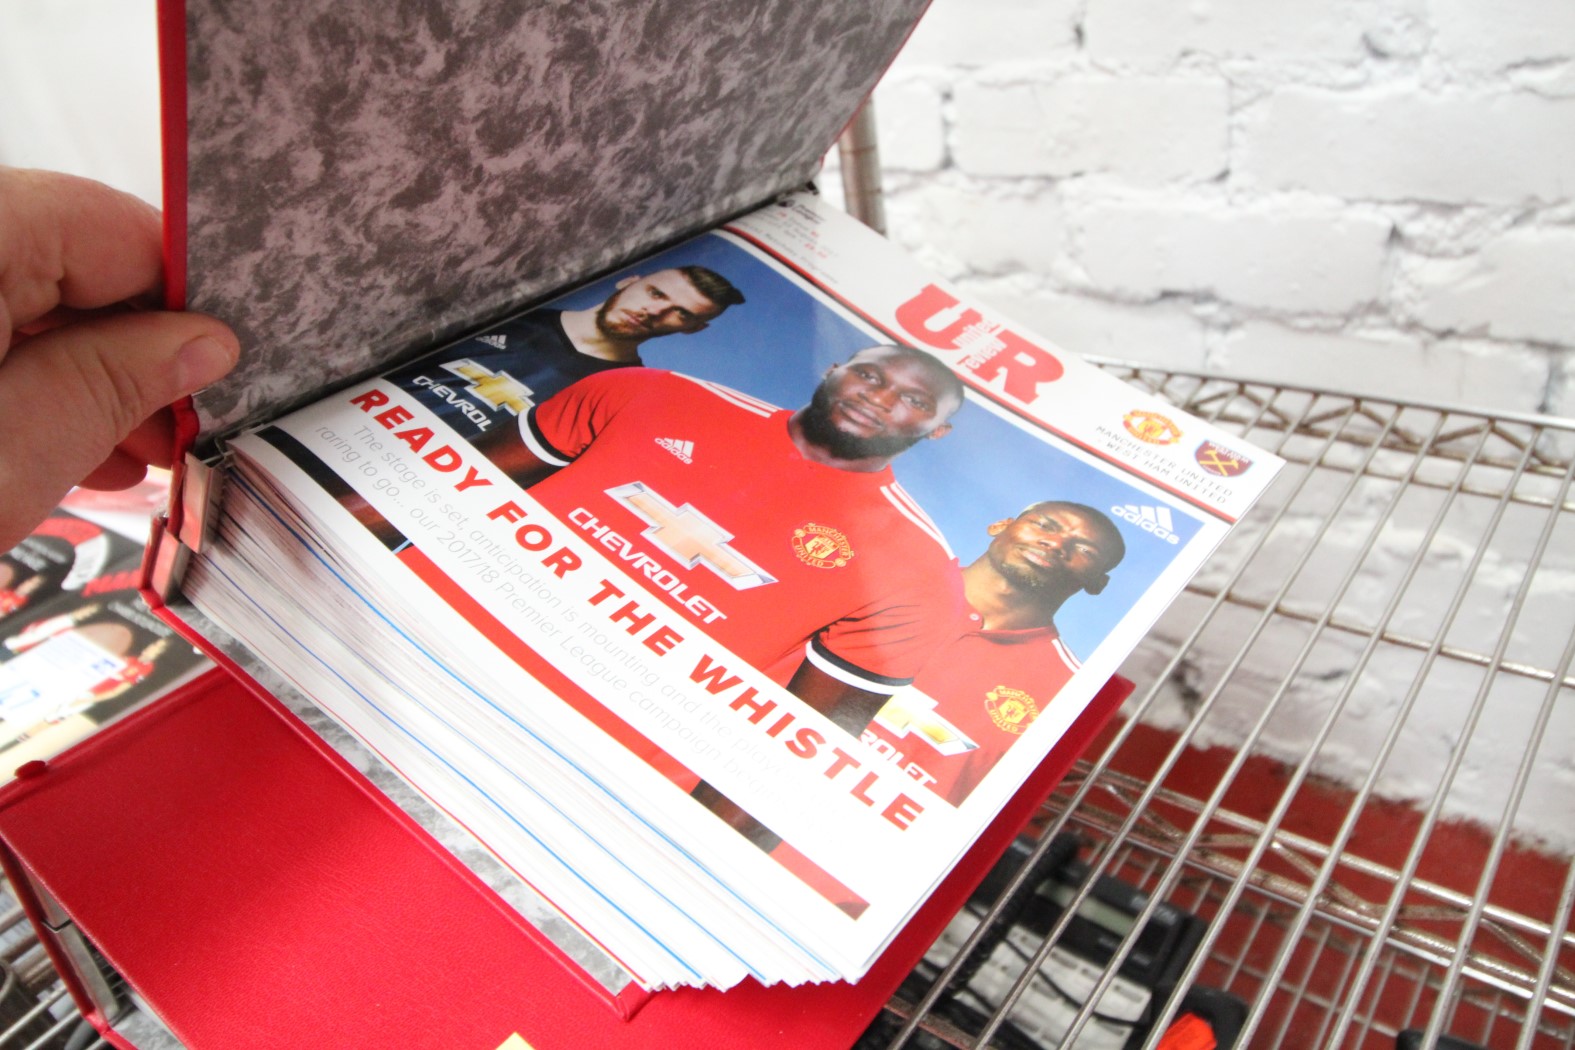 2x RED MANCHESTER UNITED PROGRAM FOLDERS AND CONTENTS OF SEASON 2017 / 18 MATCH DAY PROGRAMS - Image 2 of 2